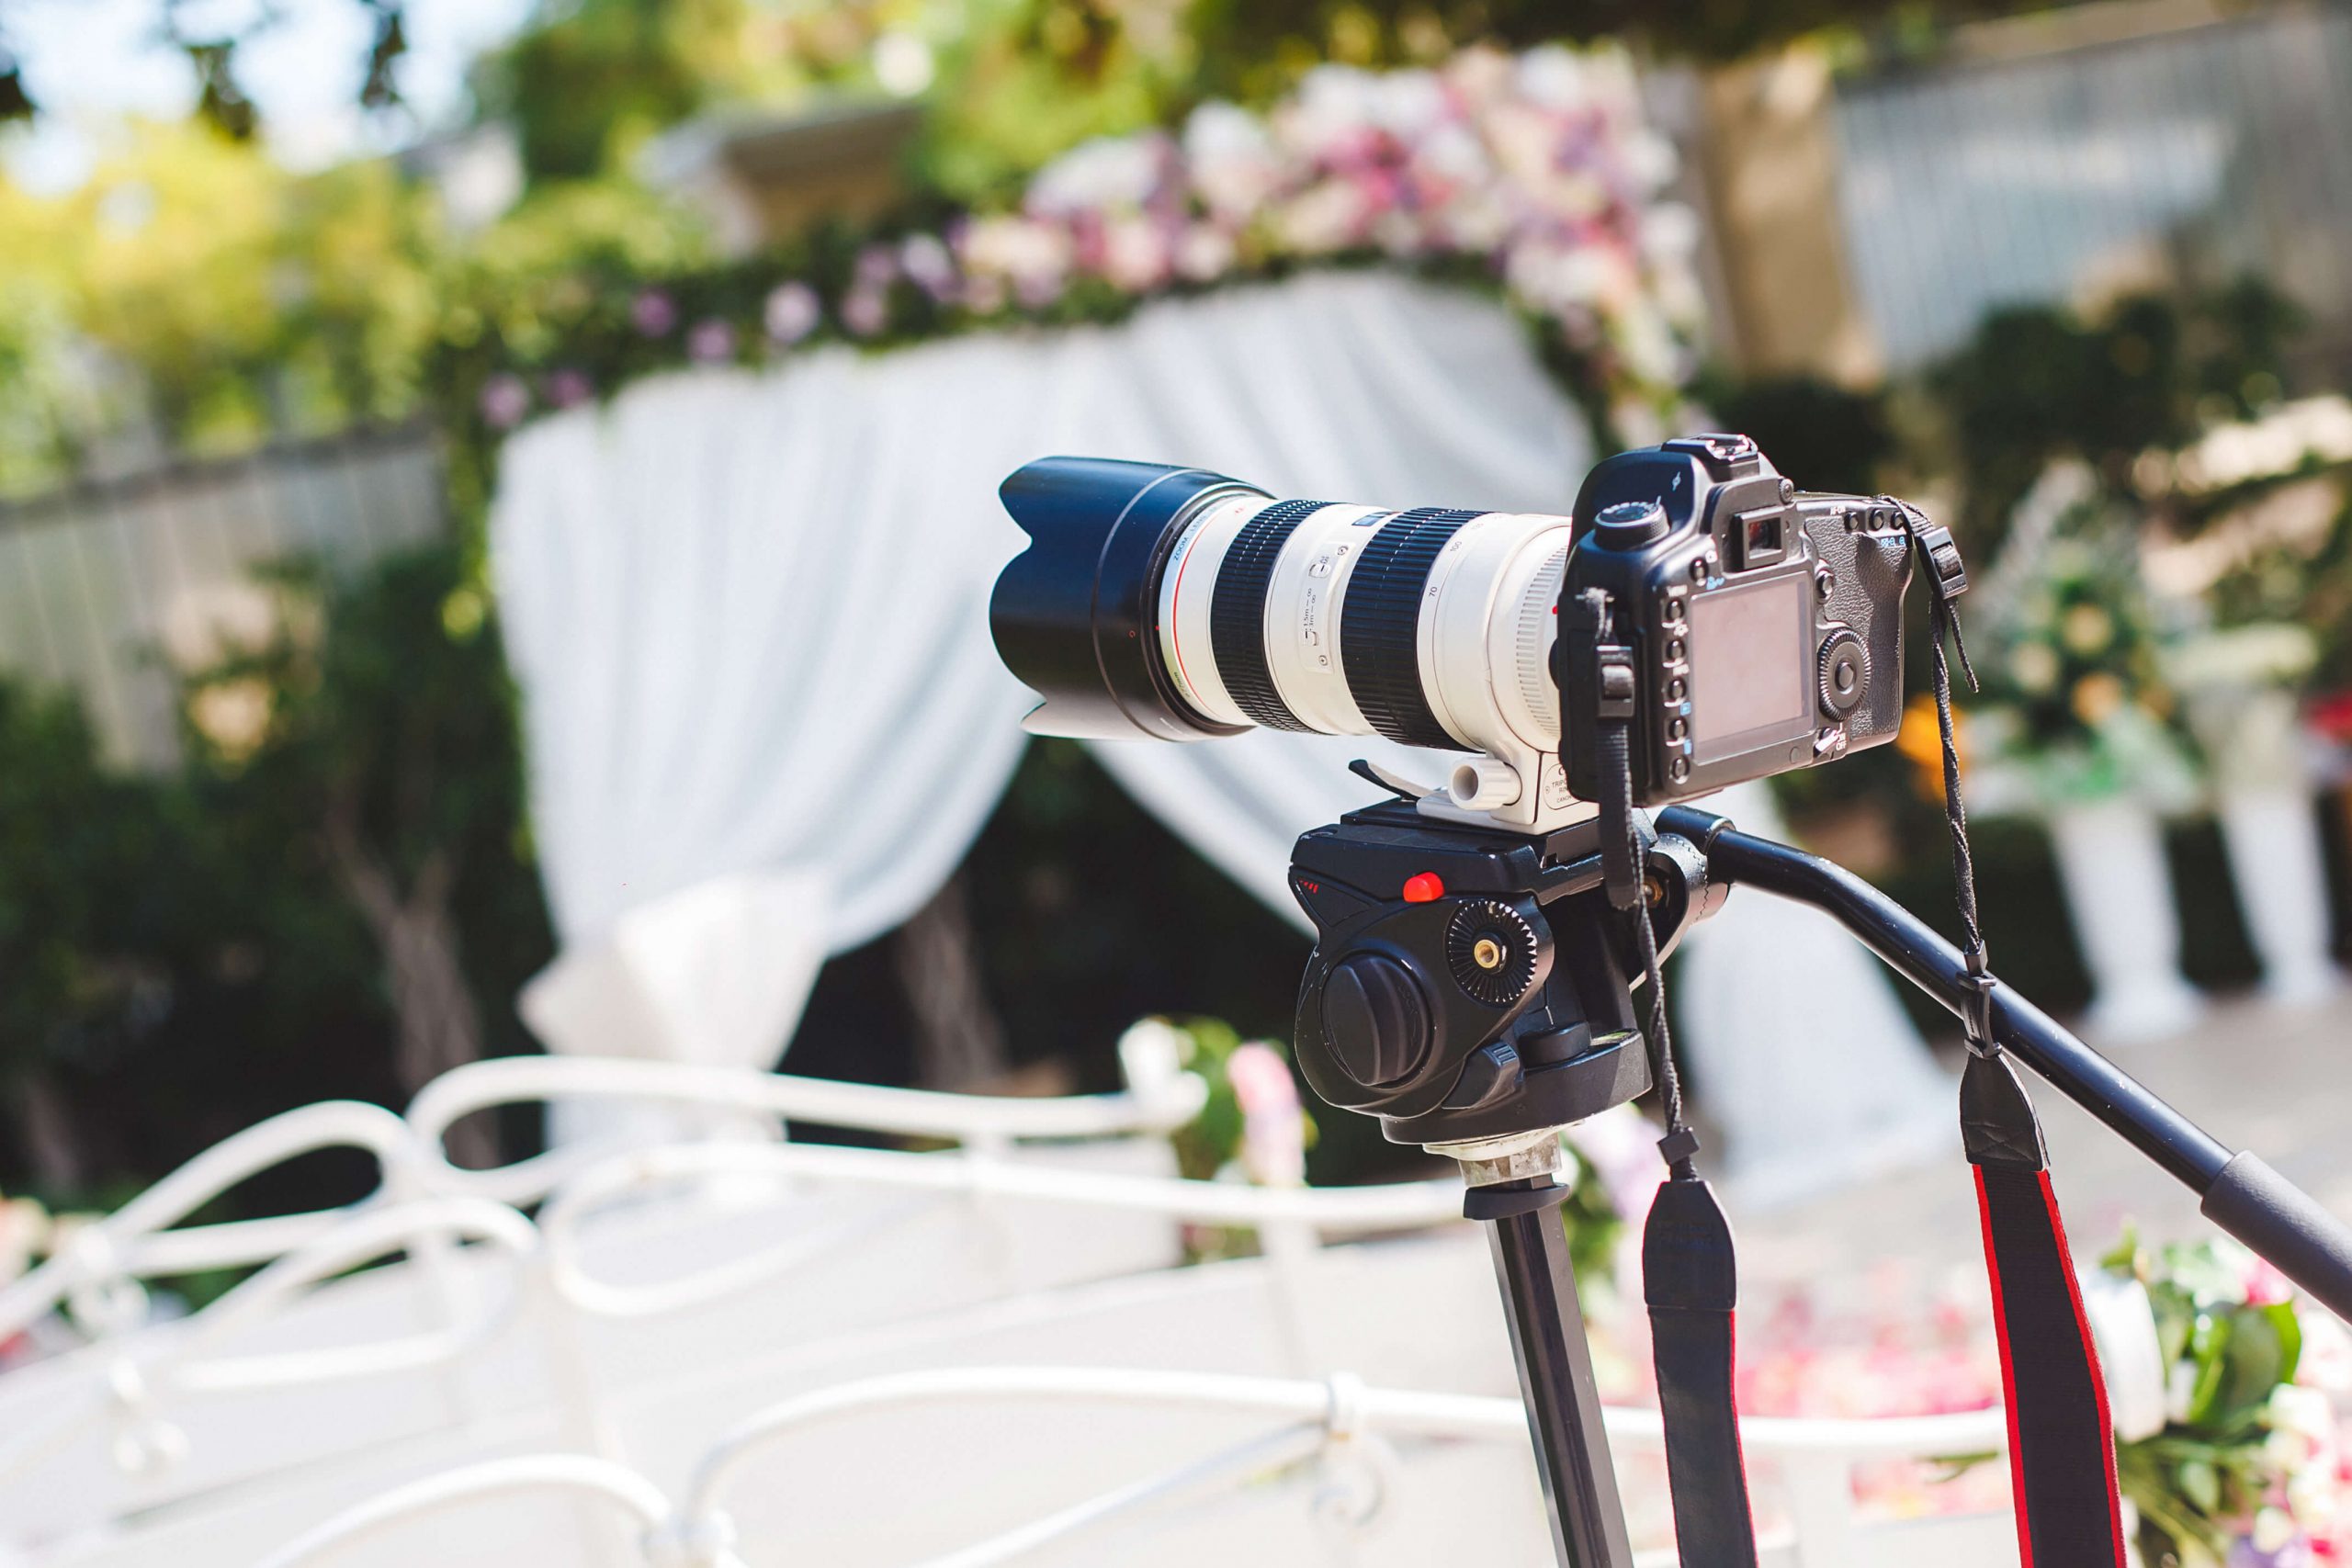 How to choose a wedding videographer